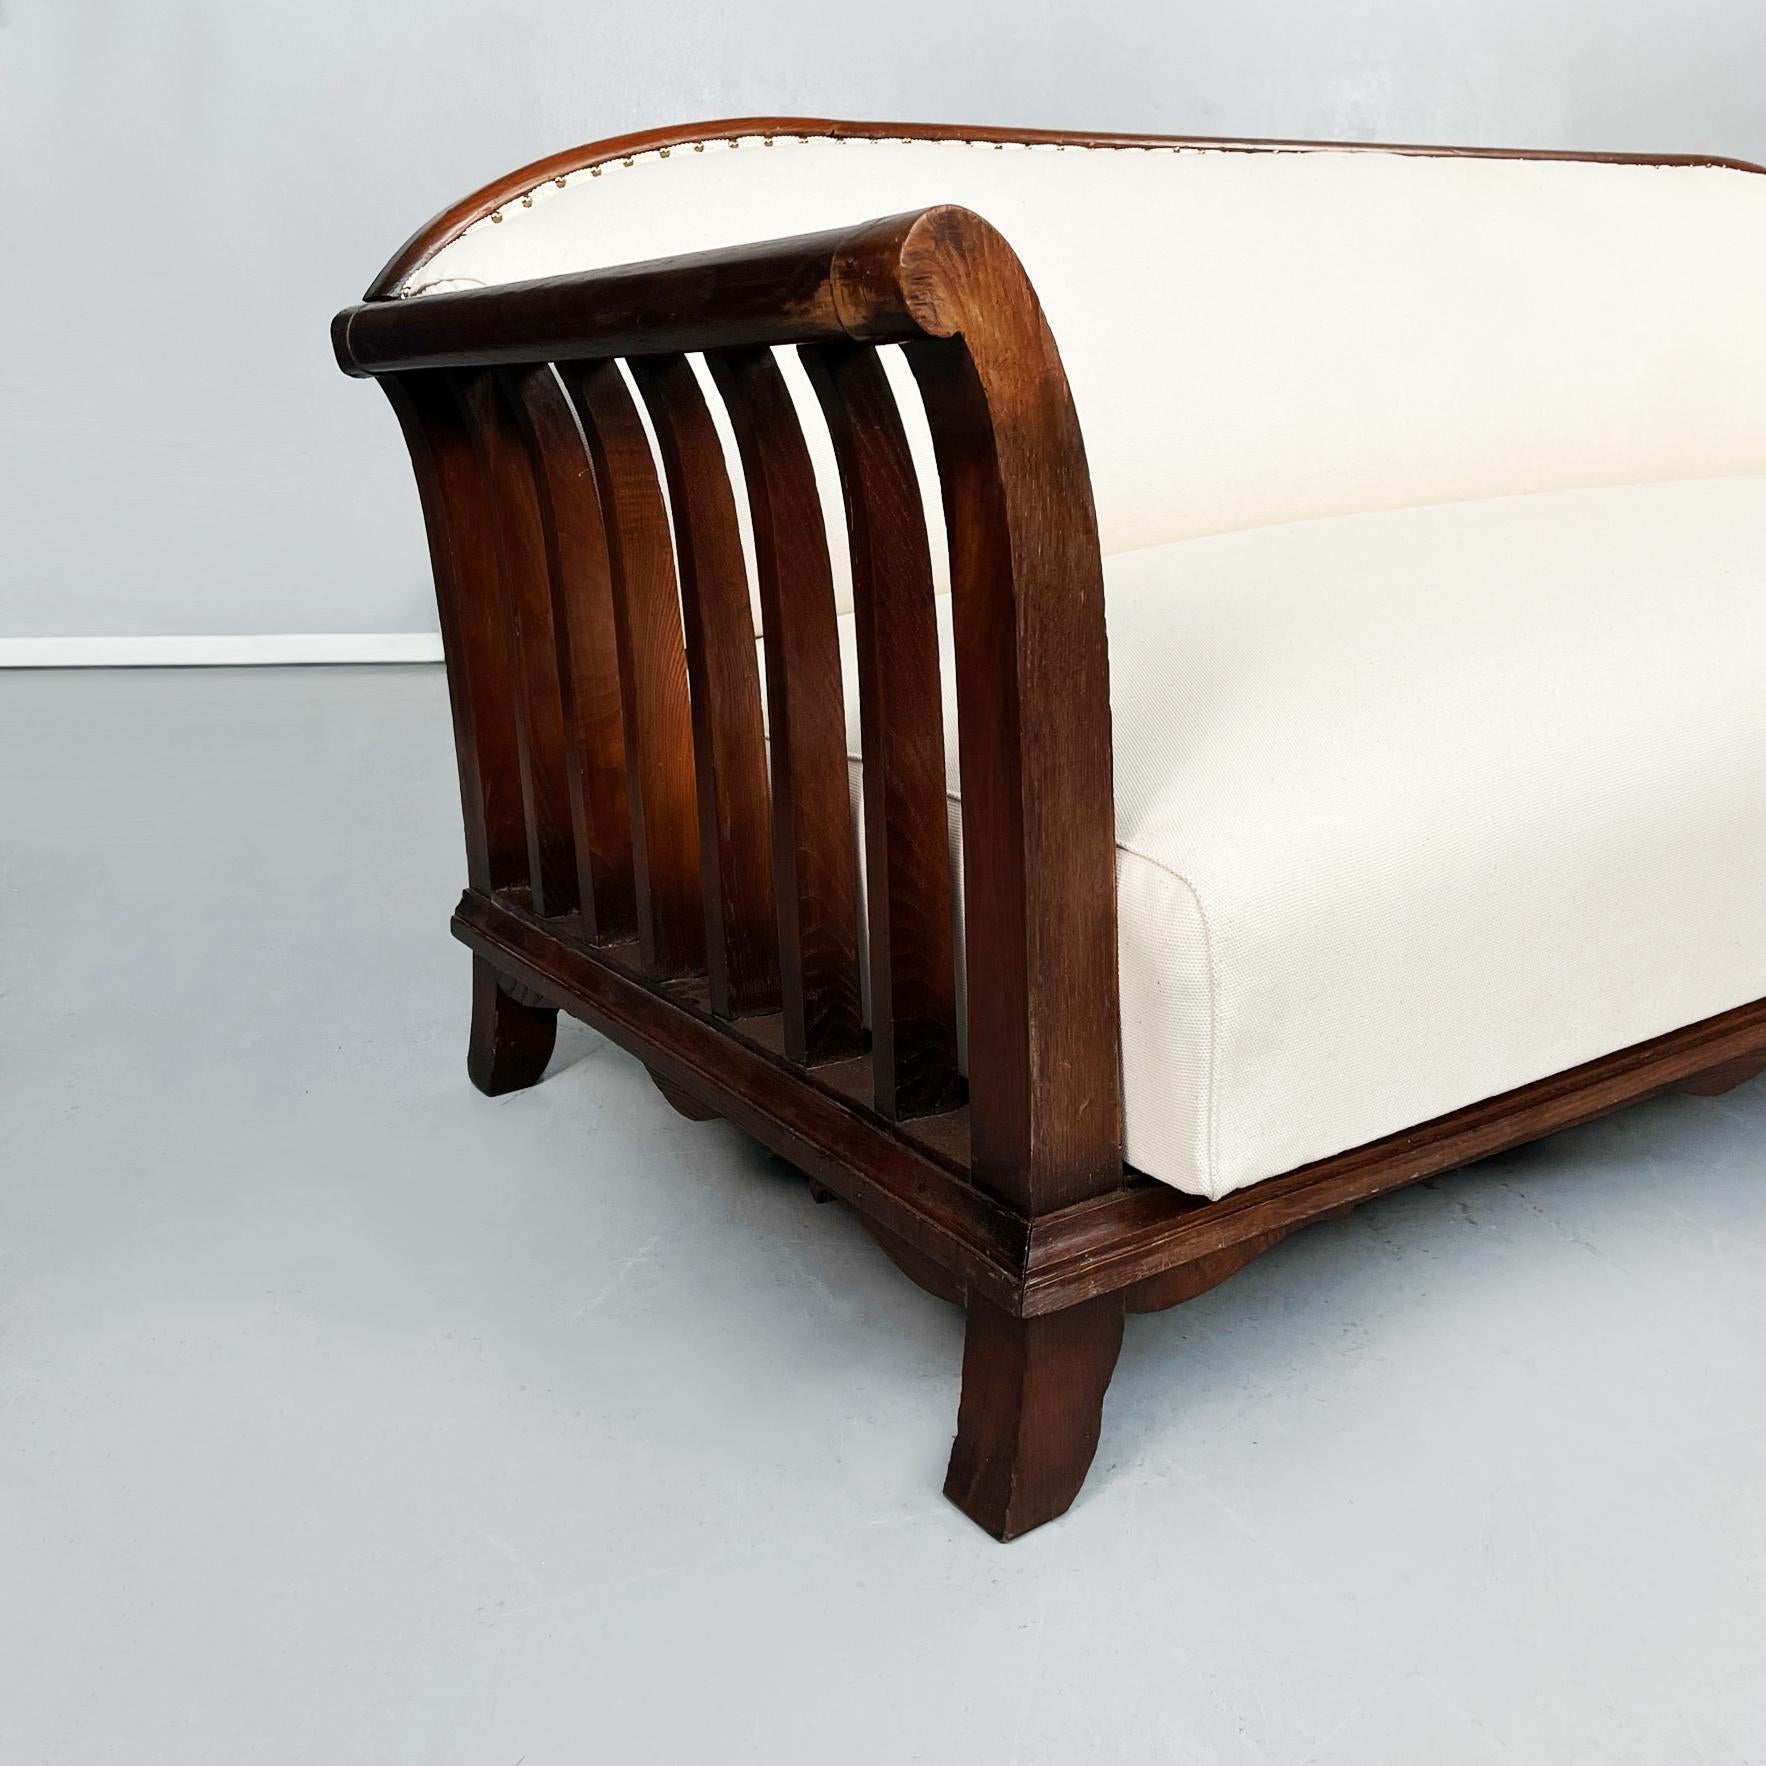 Italian Modern Wooden Sofa with White Fabric, 1940s For Sale 2